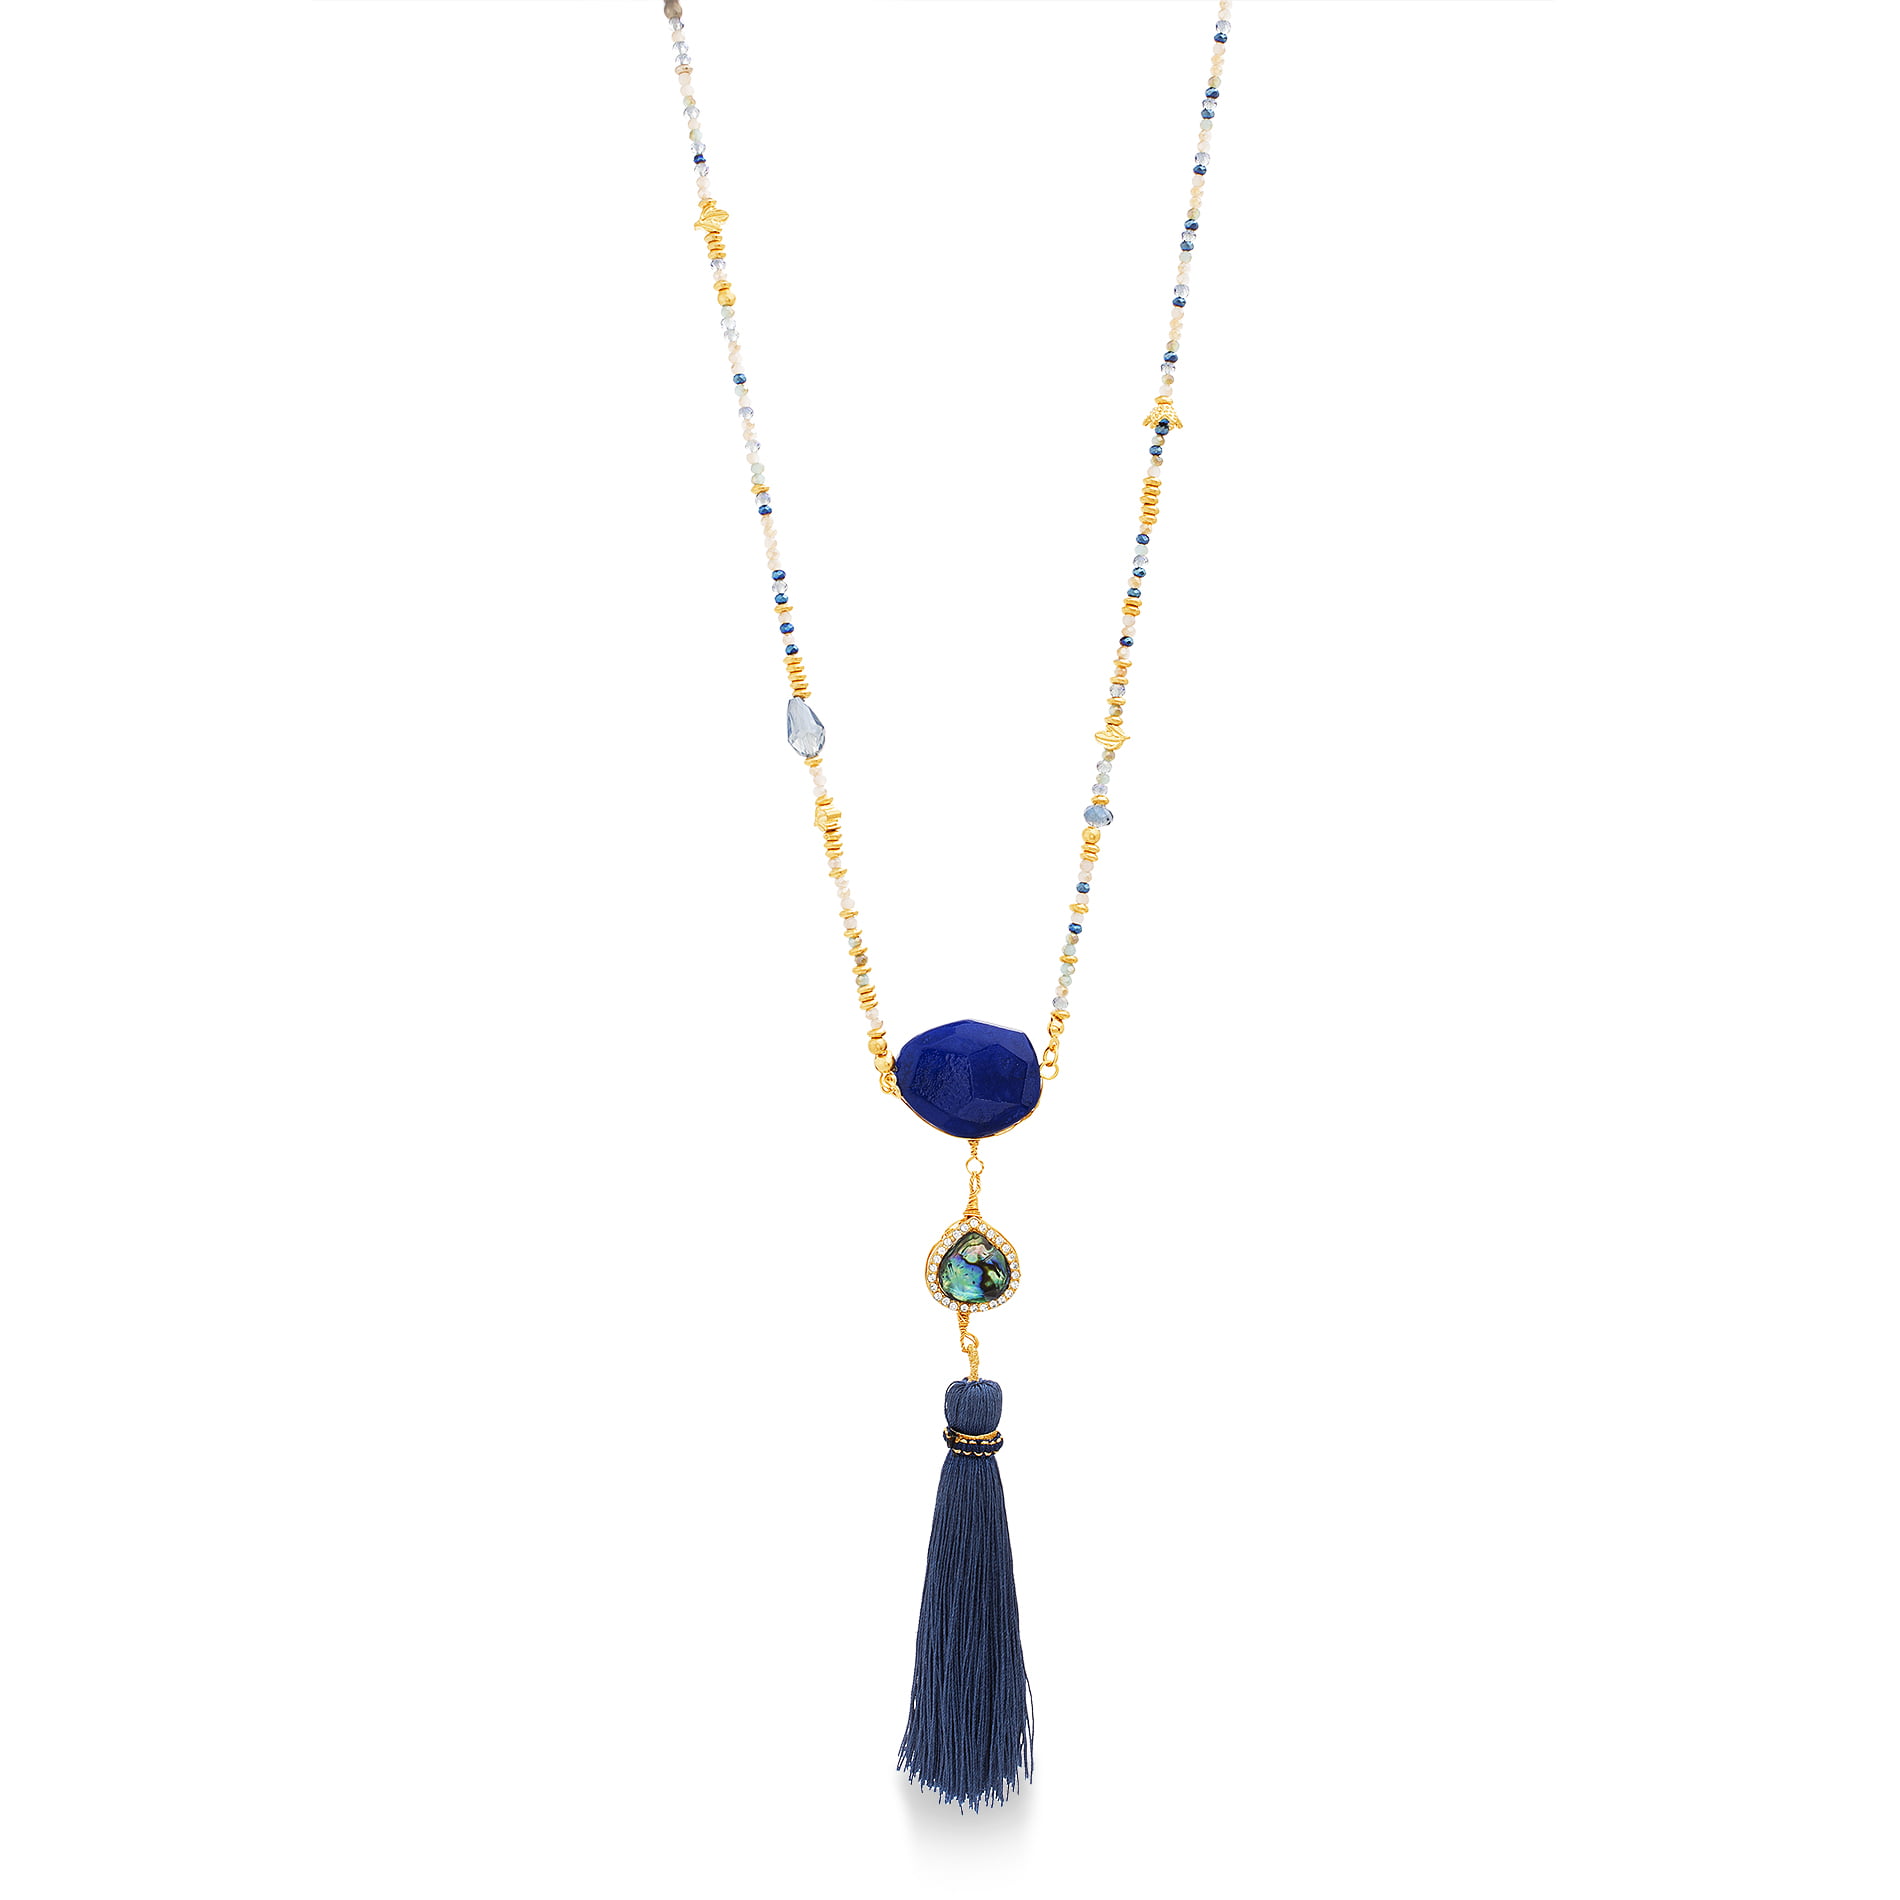 CATHERINE MALANDRINO 42 Multi-Colored Beaded Chain with Blue Tassel Yellow Gold-Tone Necklace for Women 